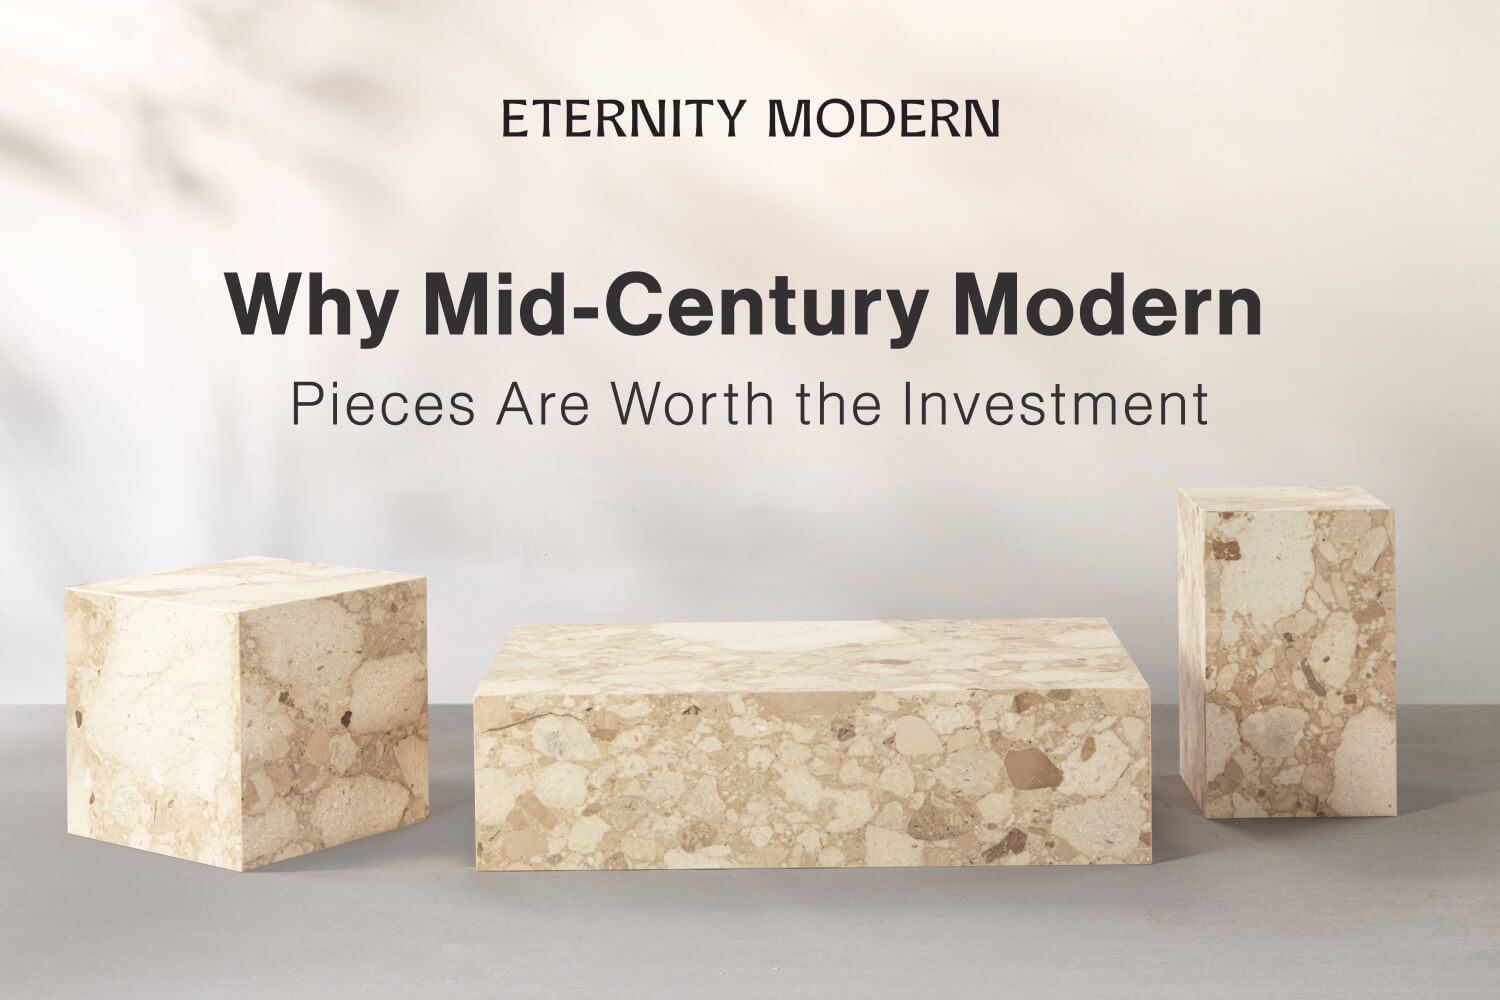 Why Mid-Century Modern Pieces Are Worth the Investment